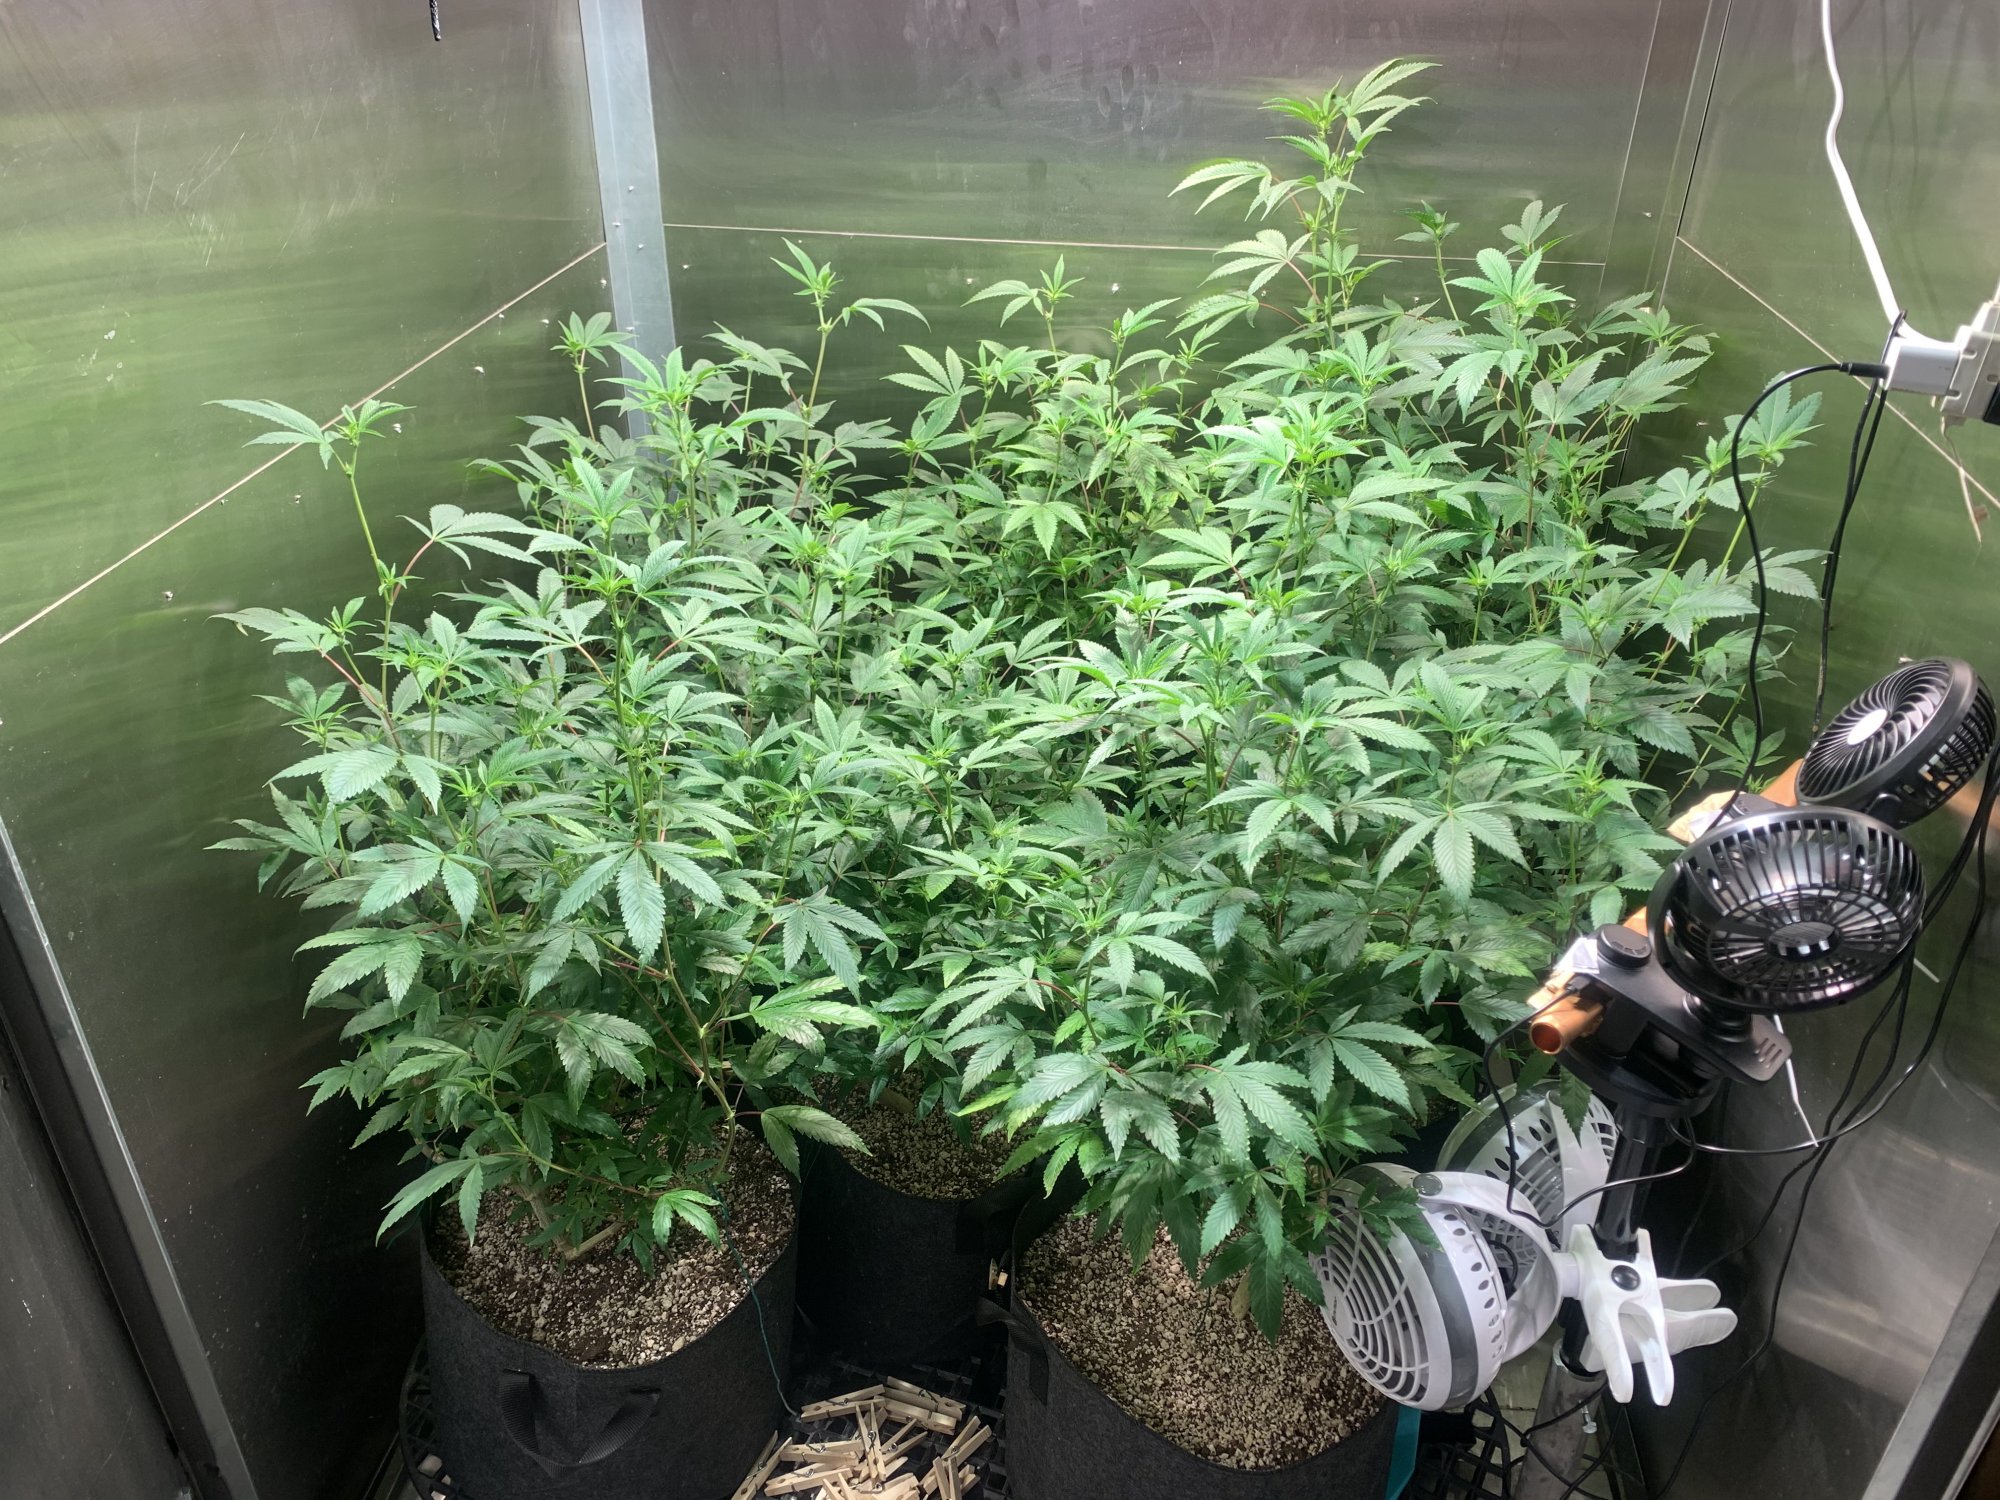 Second grow opinions on defoliation